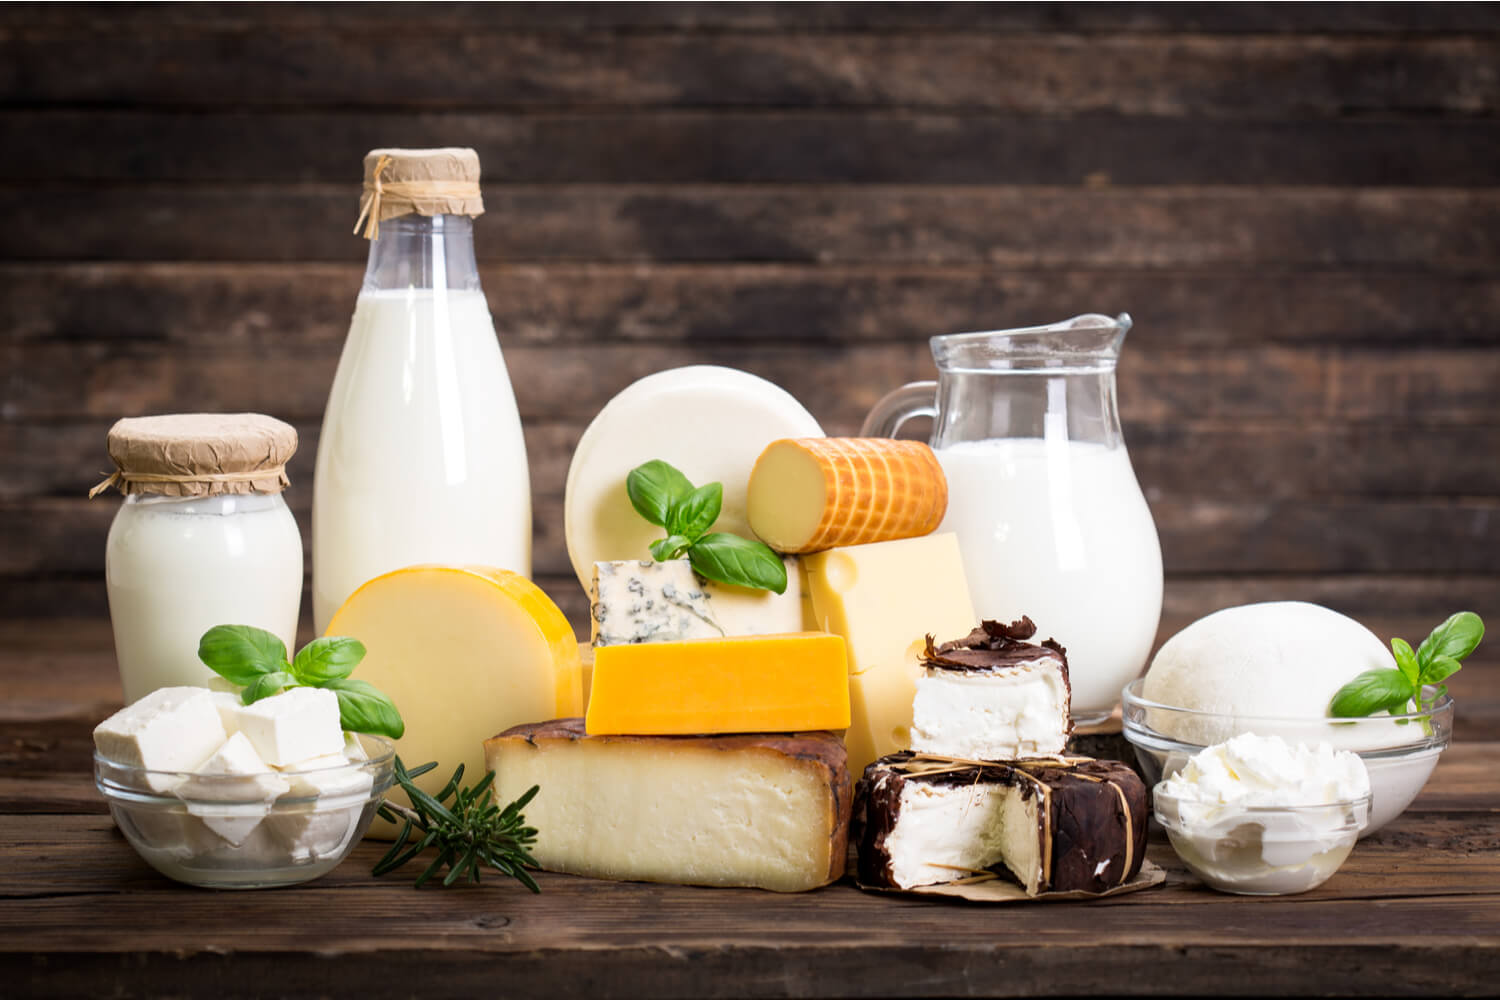 What dairy products are good during pregnancy